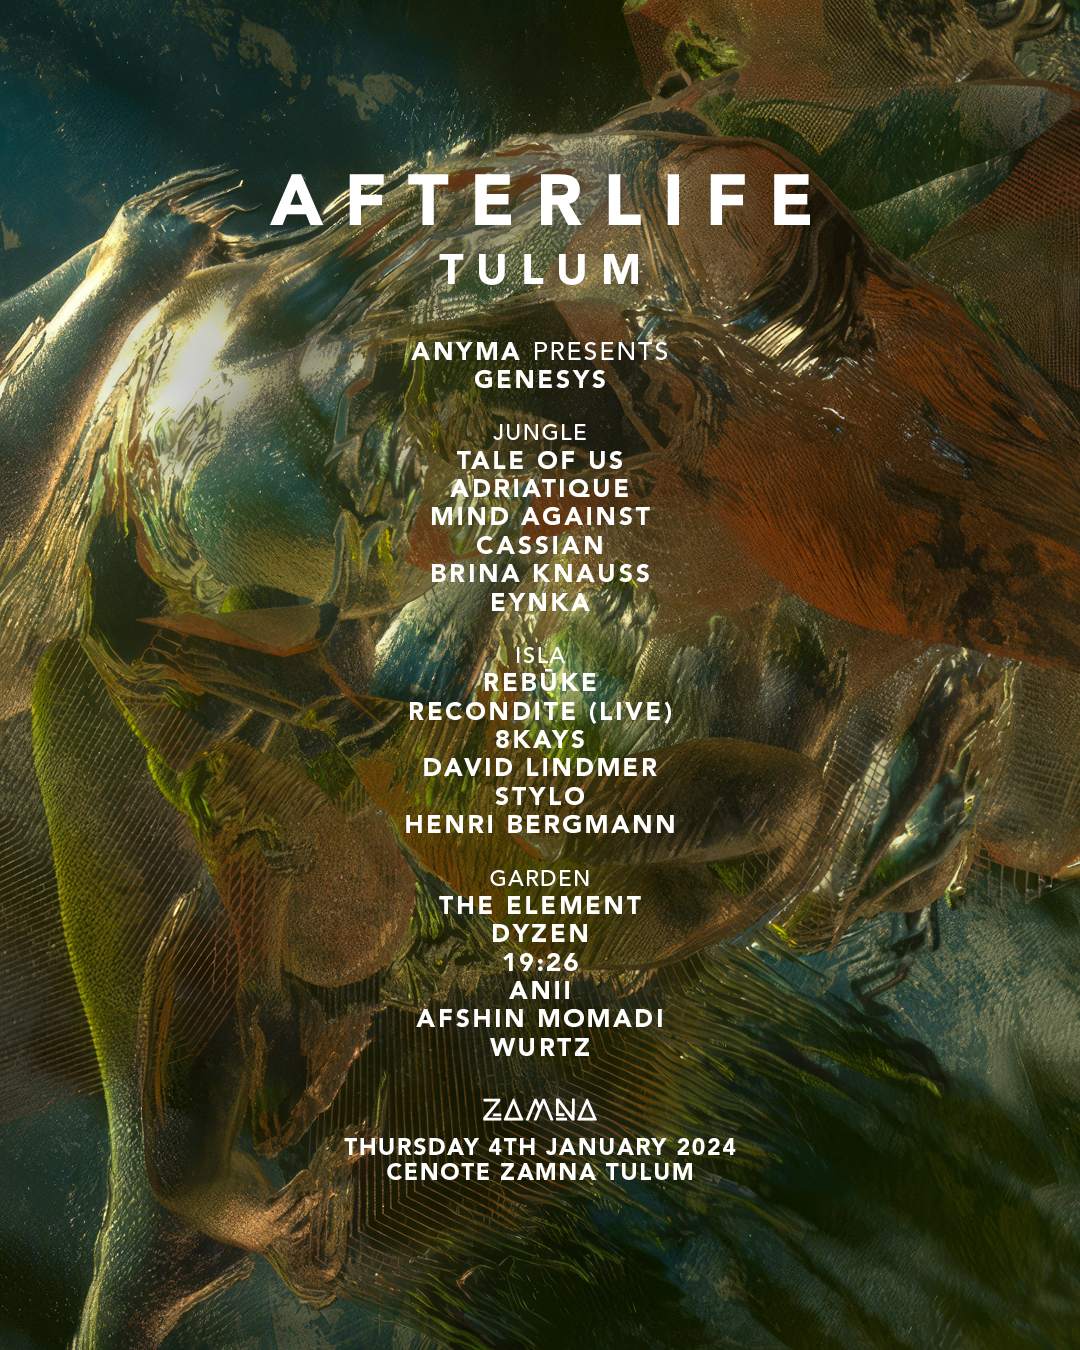 Afterlife Tulum 2022 Archives - Blog